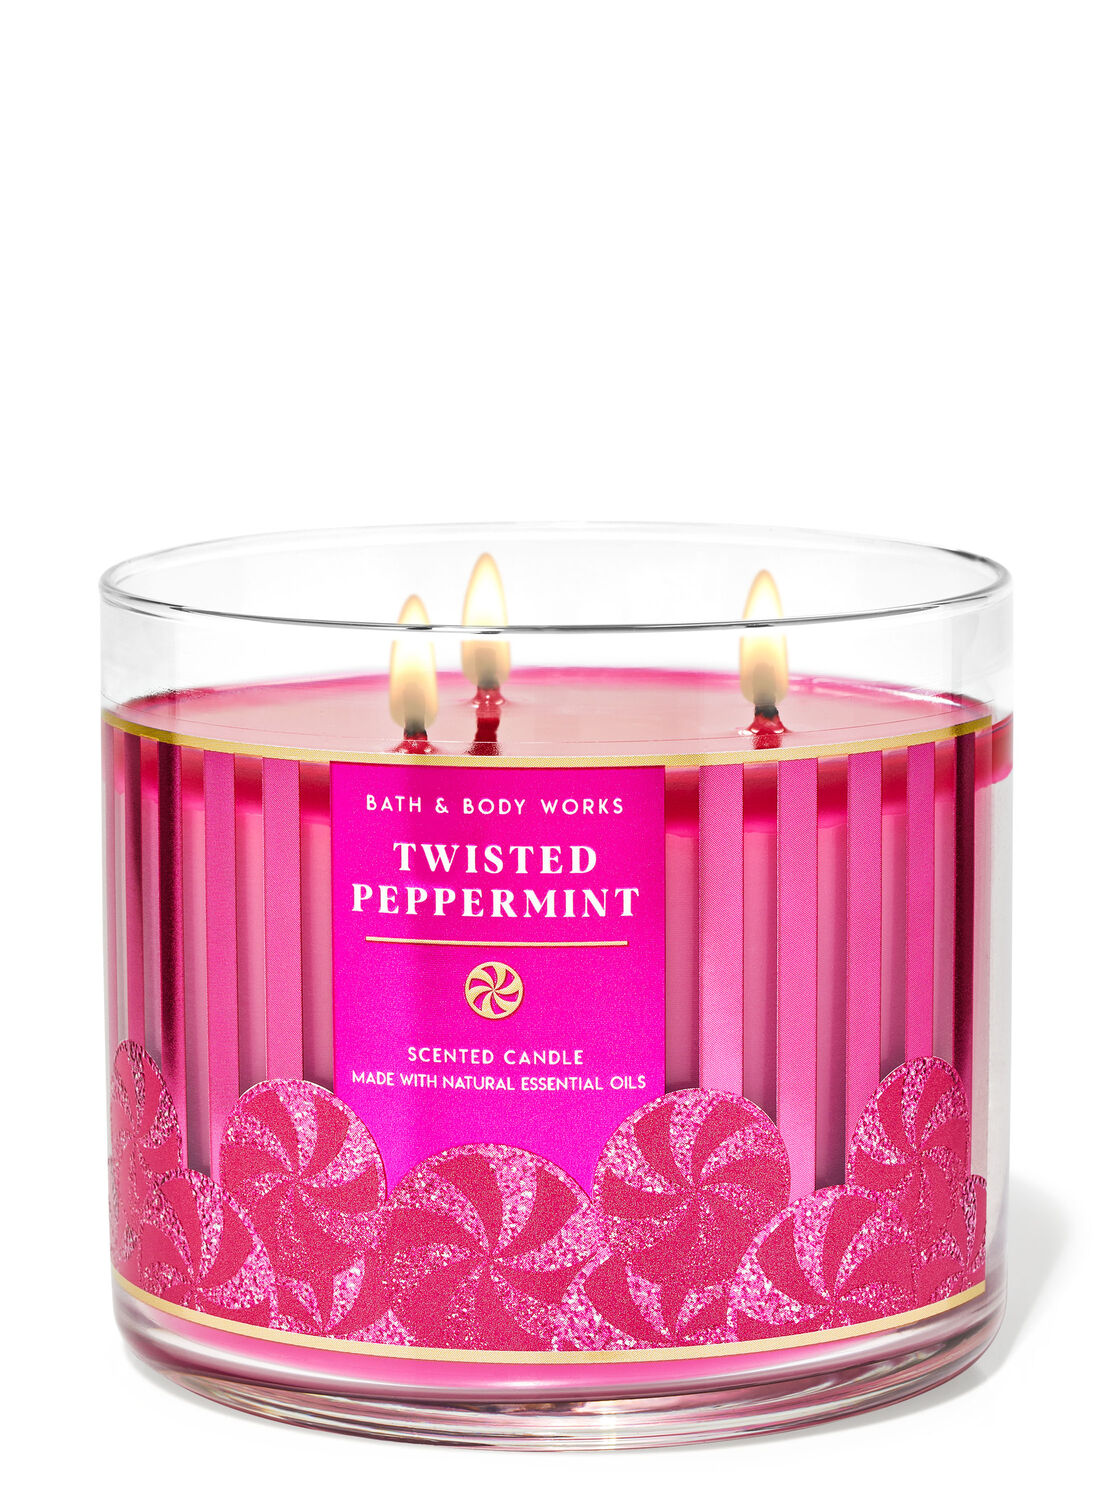 White Peppermint Scented Candle